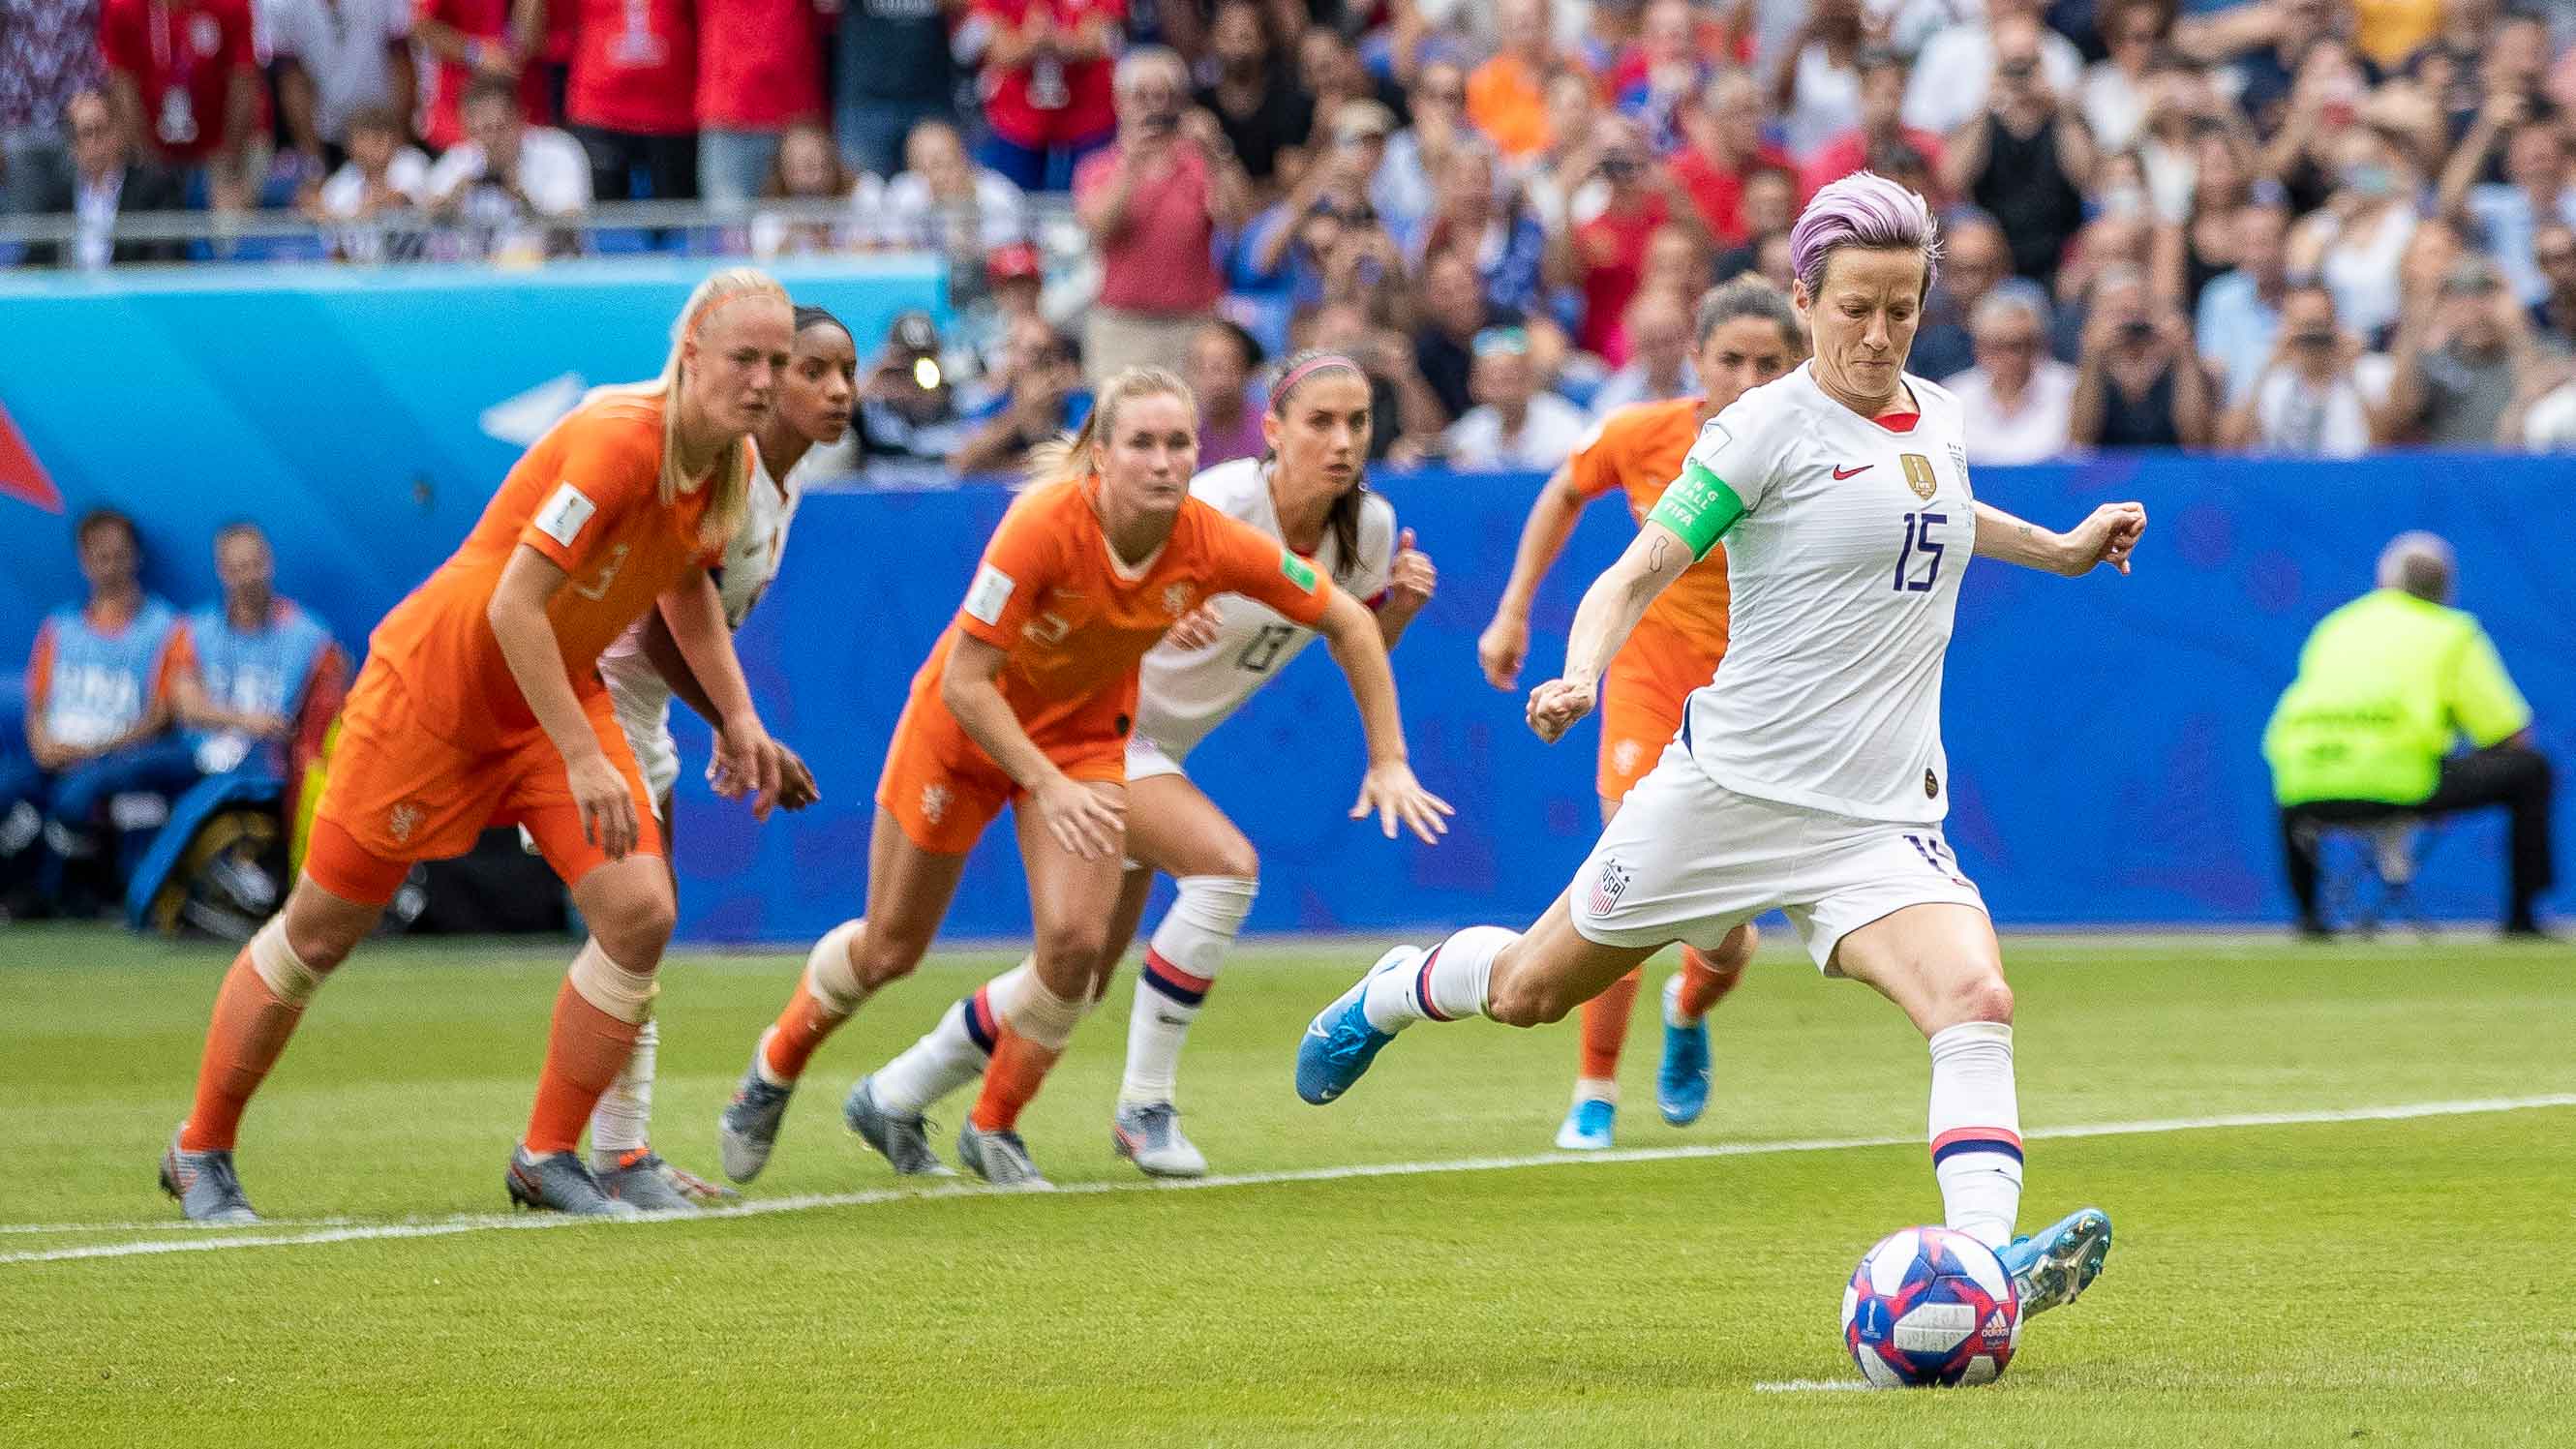 USWNT Grouped With Netherlands, Vietnam in 2023 Women's World Cup Draw